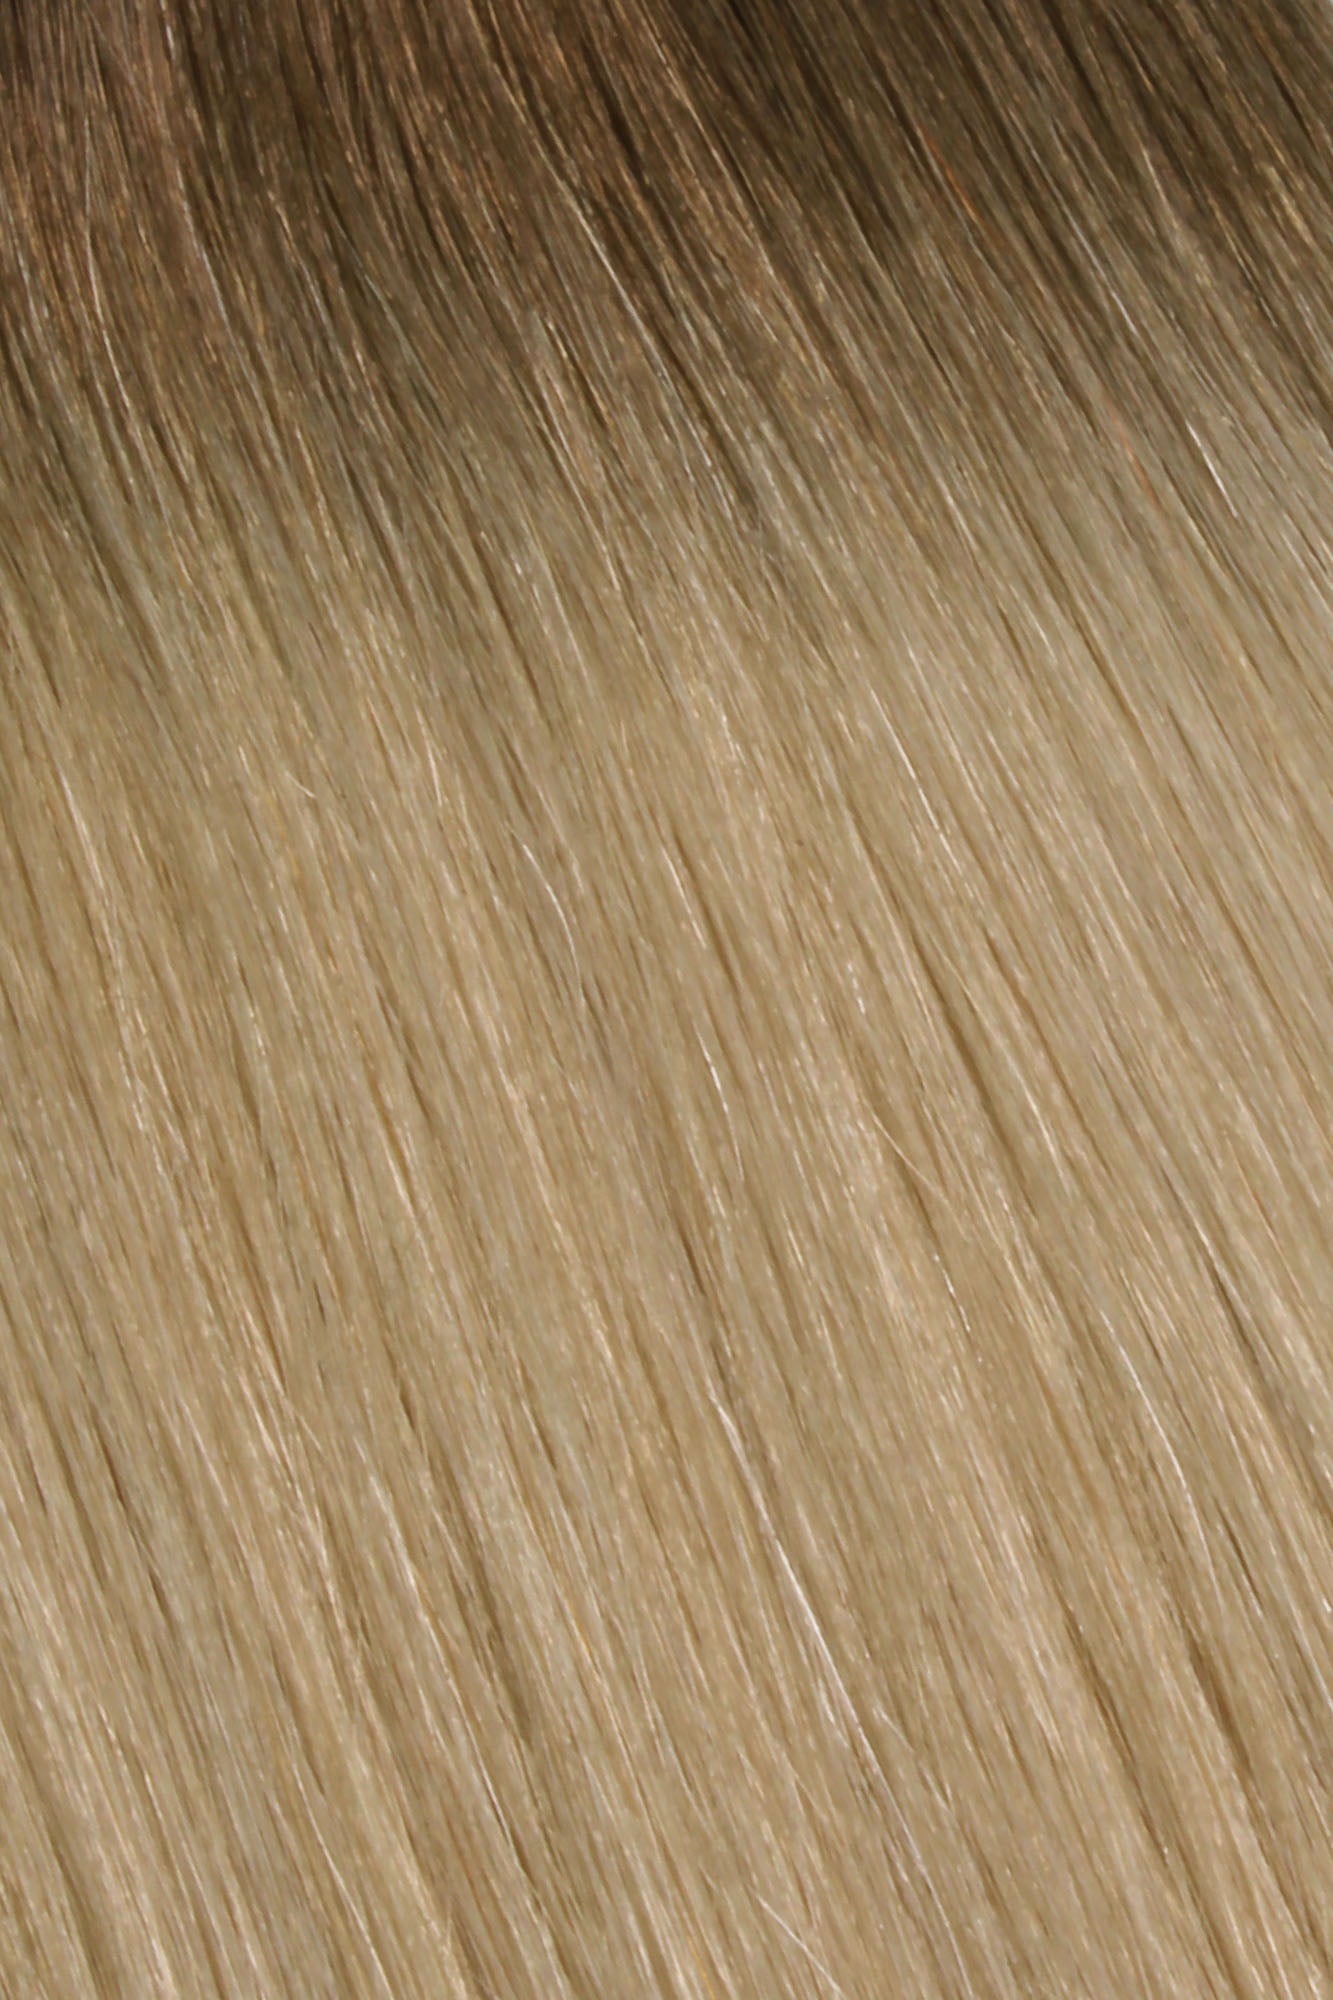 SEAMLESS® Flat Weft 20 Inches - SWAY Hair Extensions Rooted-Beach-Ash-Blonde-R5-9-613 Natural SEAMLESS® Flat Weft 20 Inches extensions. Thin, flexible, and discreet. 100% Double Drawn Remy Human Hair. Versatile and reusable